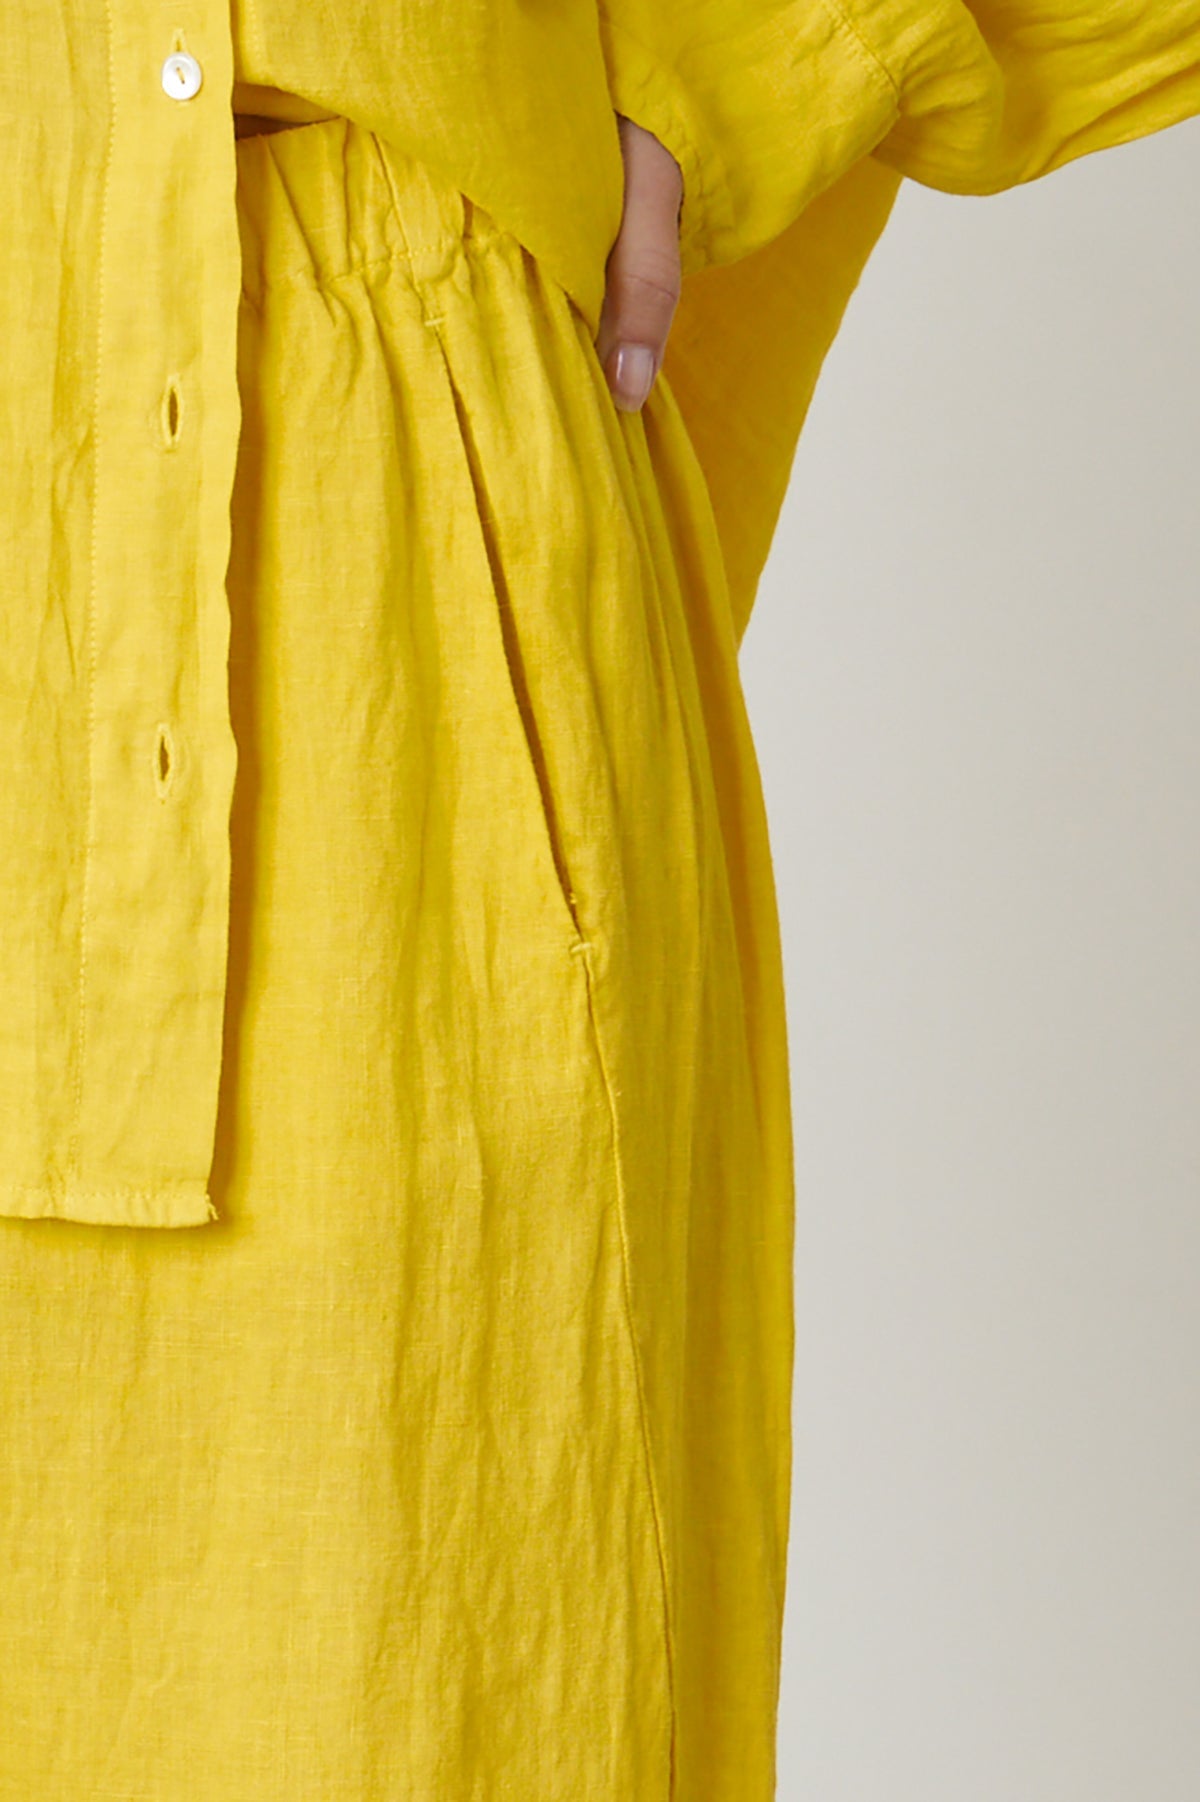   Lola pant in bright yellow sun colored linen close up detail of hip and pocket front 